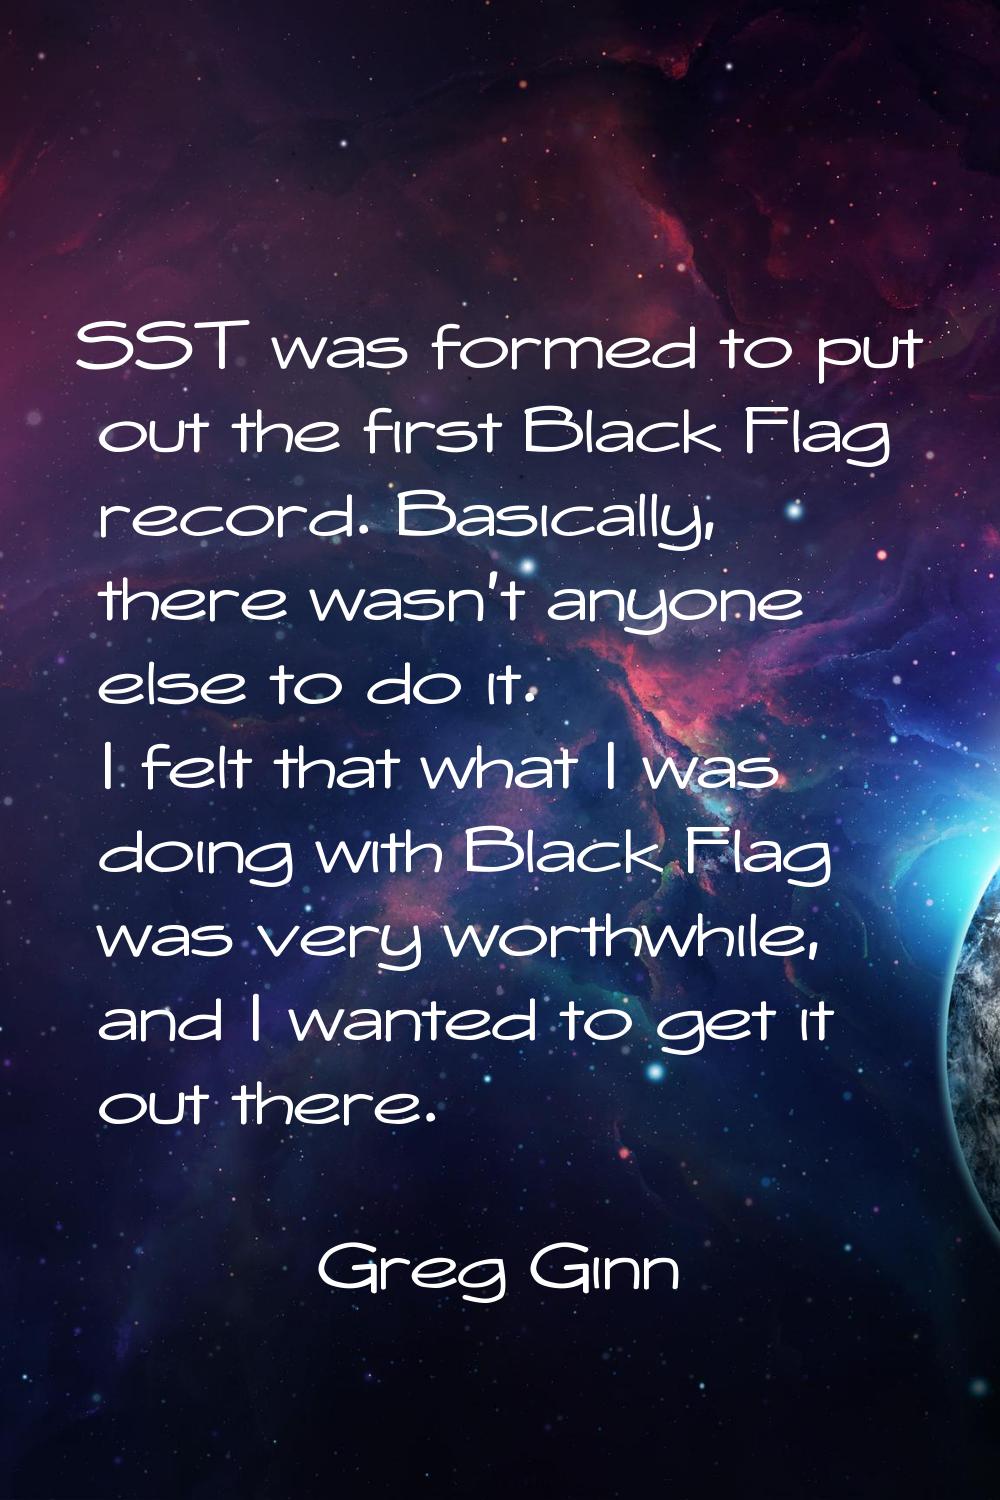 SST was formed to put out the first Black Flag record. Basically, there wasn't anyone else to do it